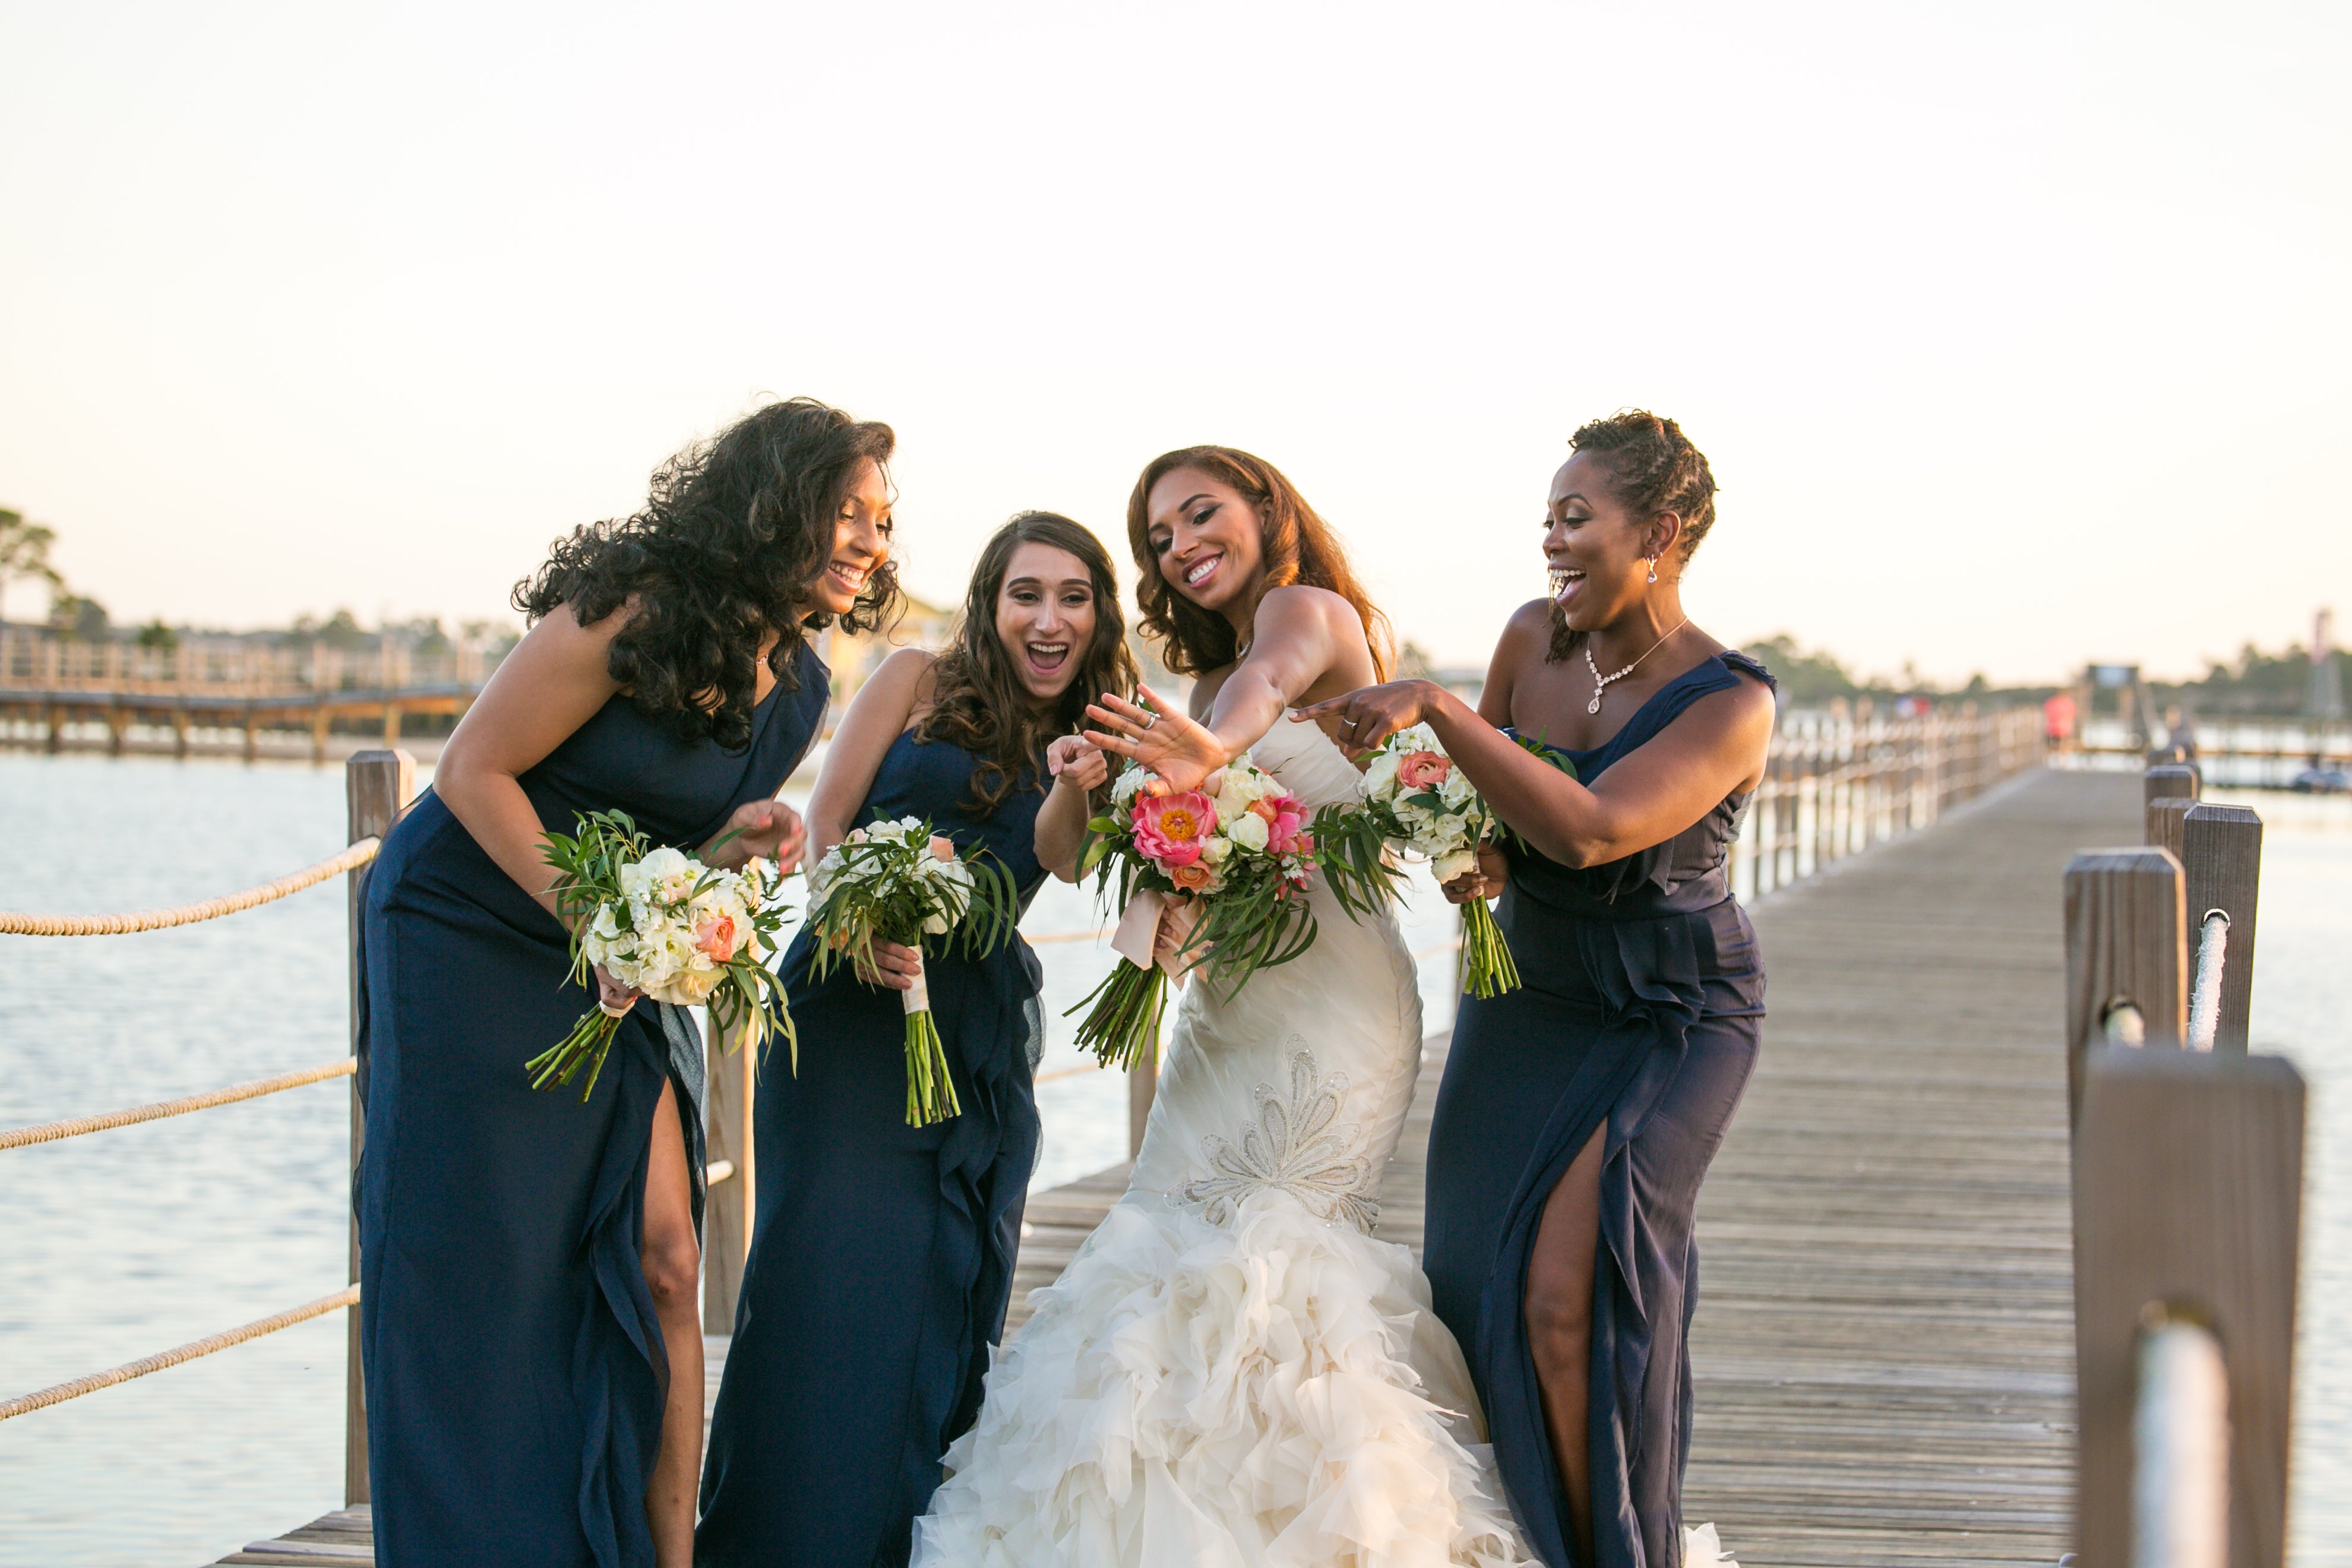 Bridal Bliss: Maurice and Angelina's Oceanfront Wedding Was Absolute Beach Chic
